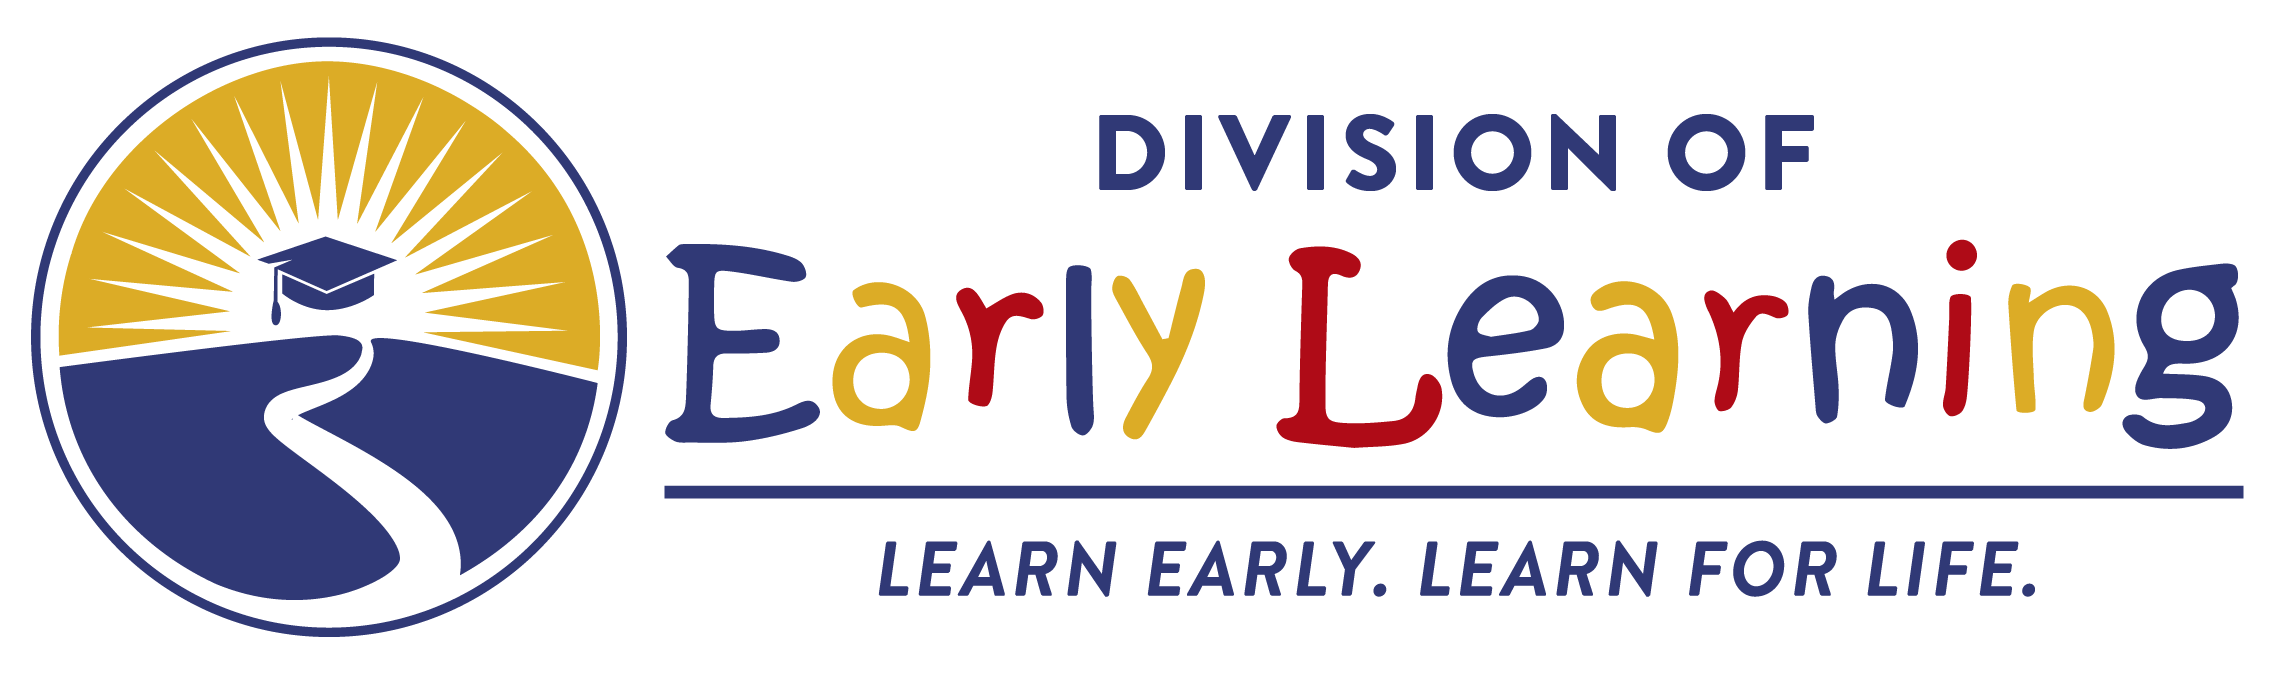 Office of Early Learning logo